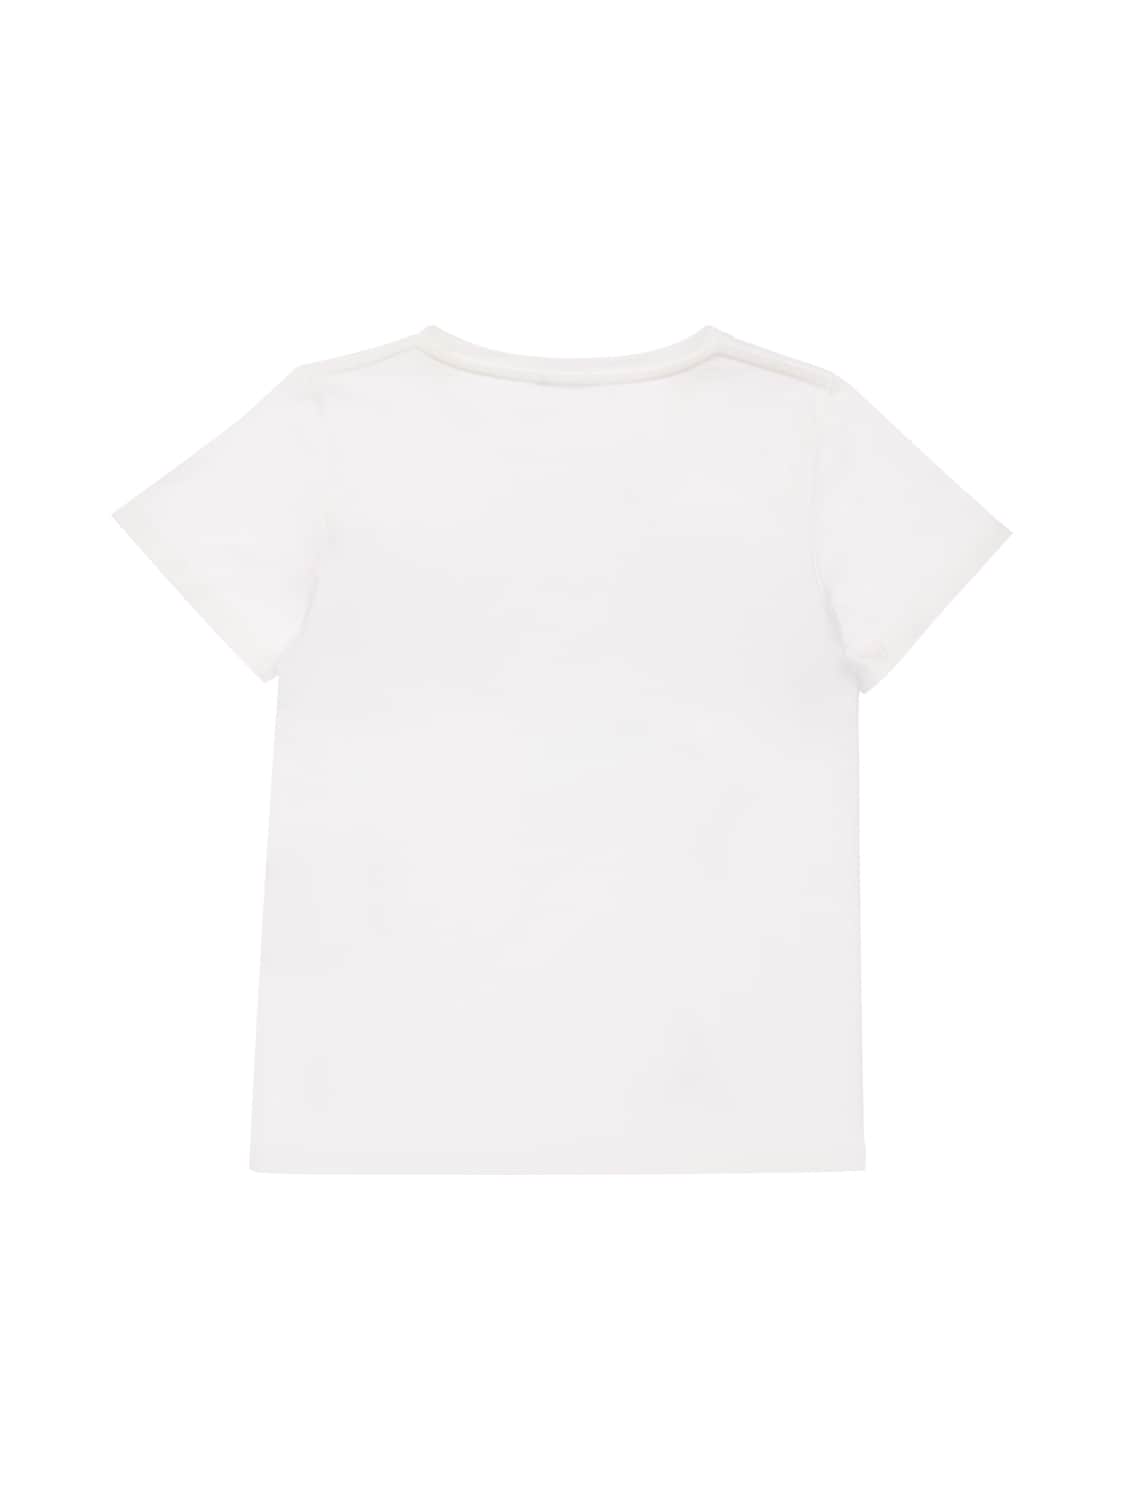 Shop Gucci Logo Printed Cotton Jersey T-shirt In White